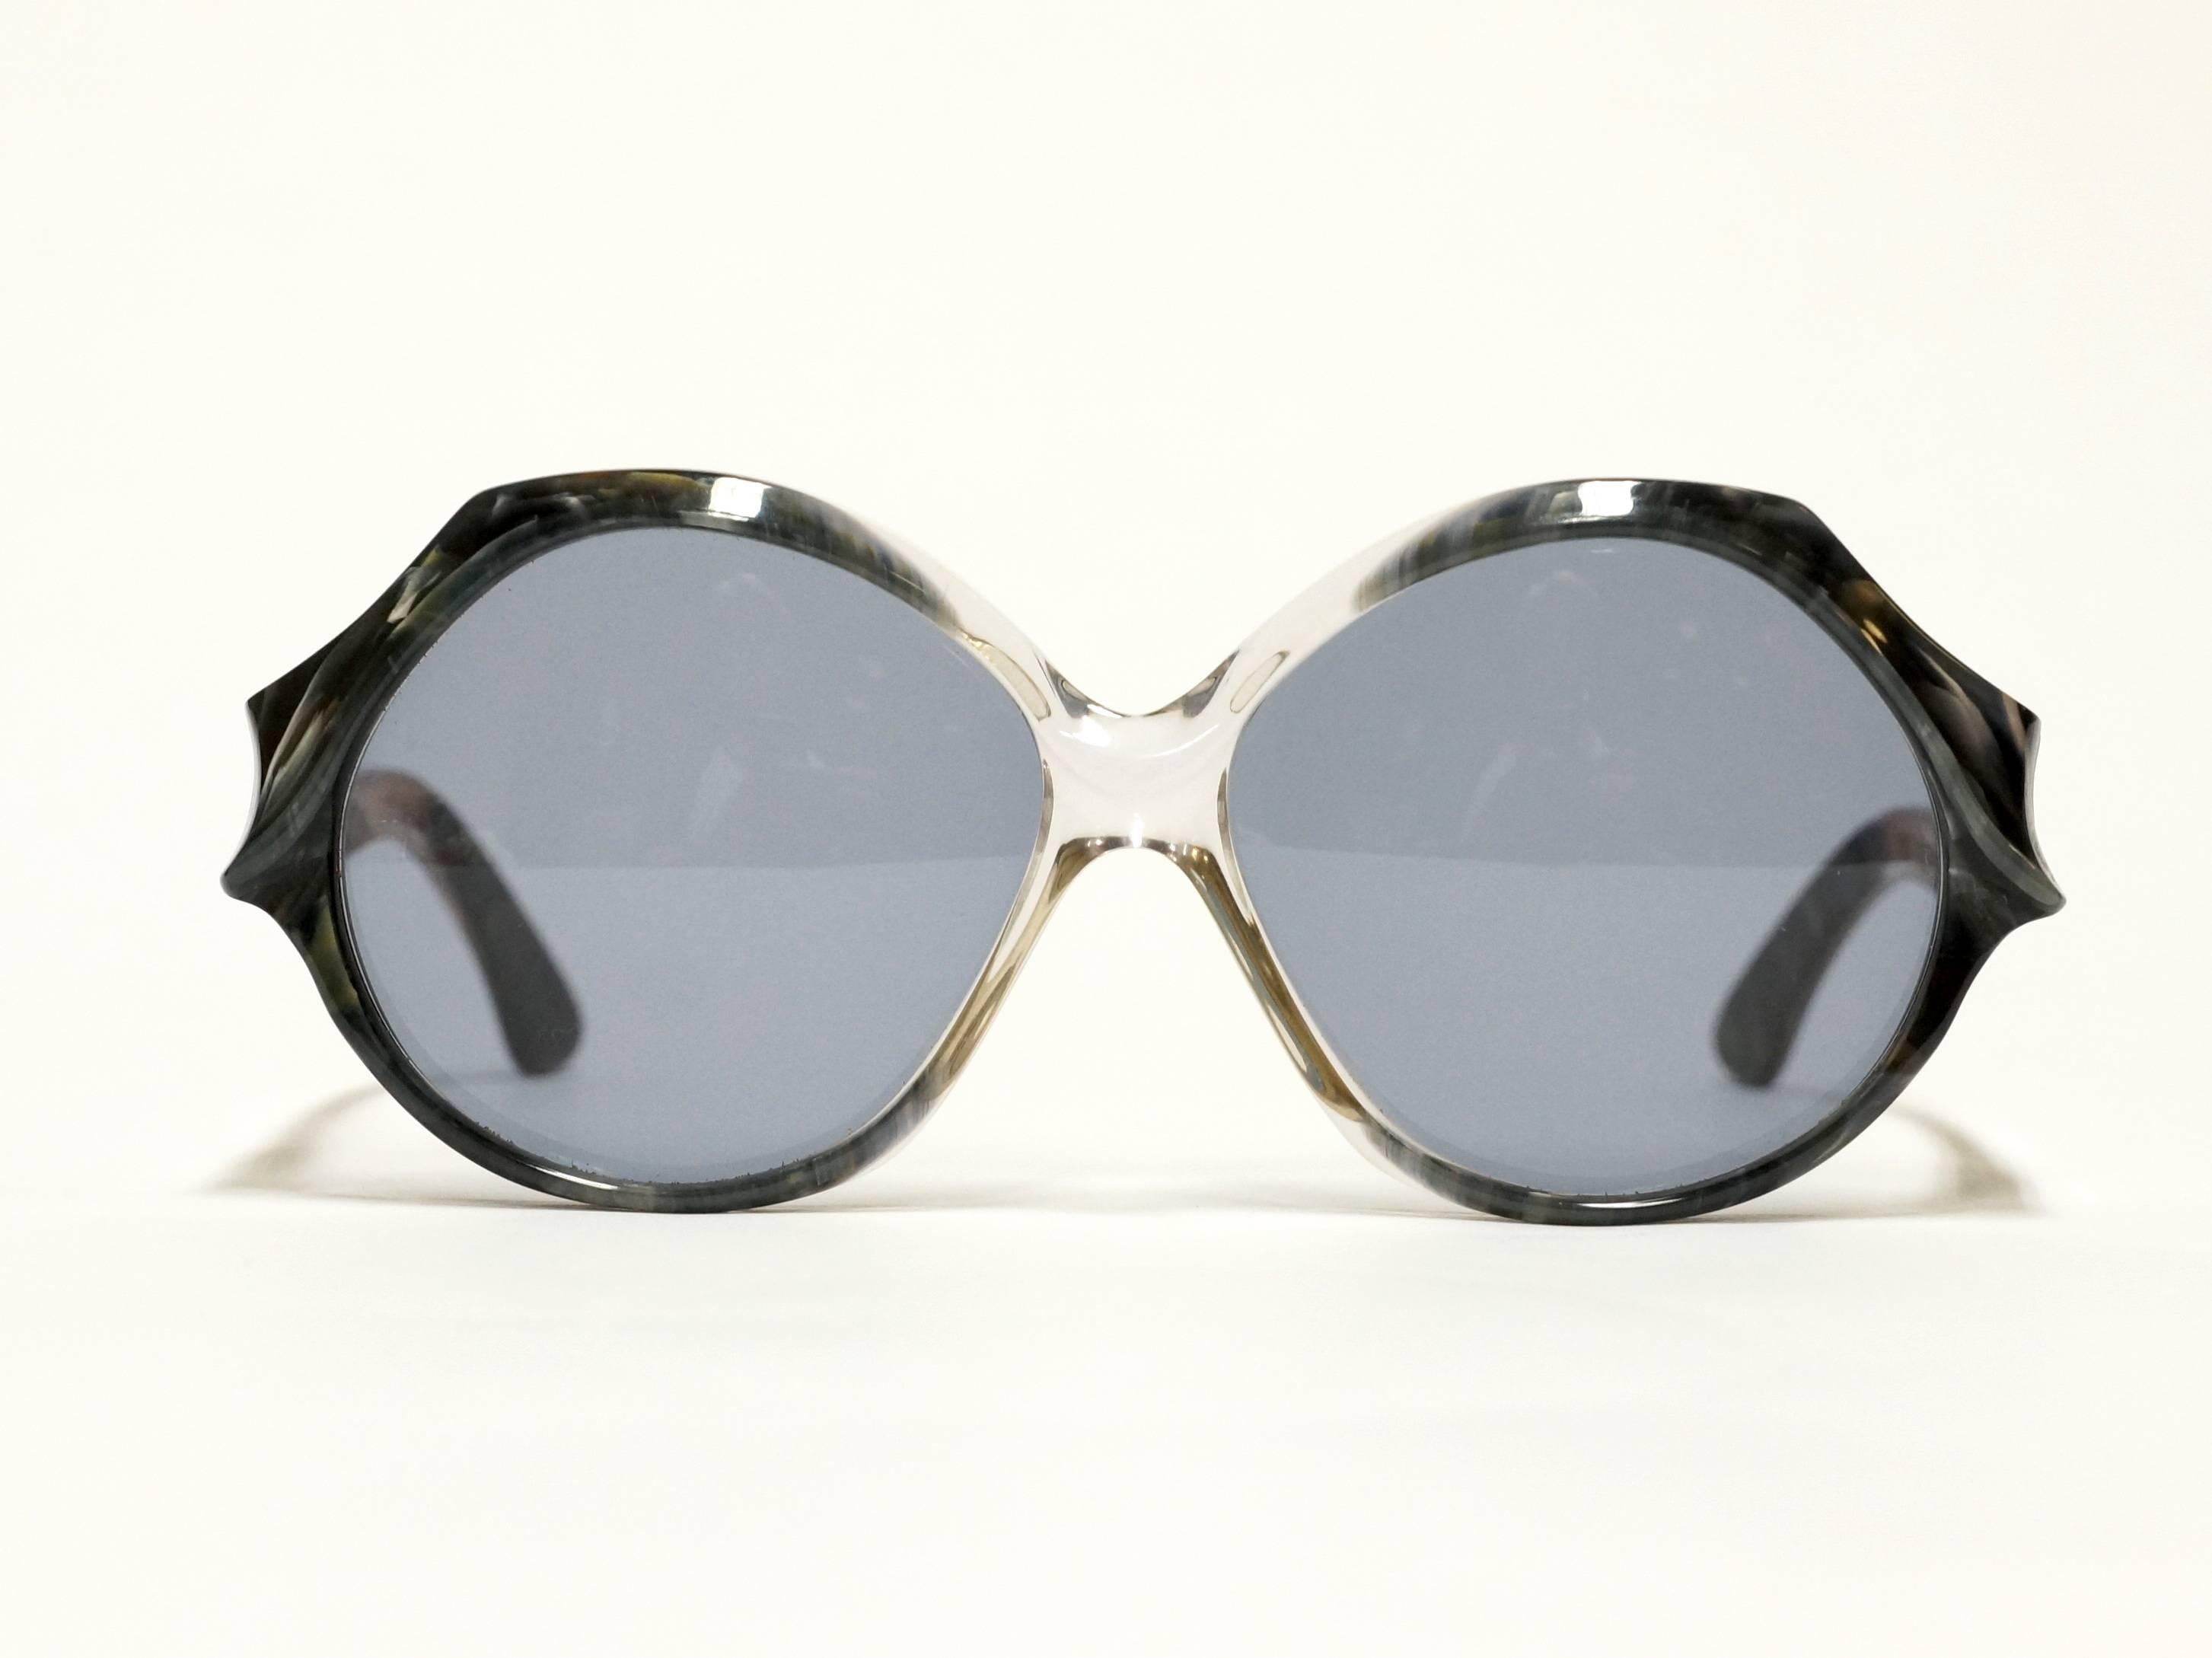 1970s French vintage sunglasses by Jacques Fath. Round acetate frame, dark gray on the sides, becomes almost transparent in the middle. 

Model: Esterel/7
size: 54▢18 -125

approximate dimensions:
temple length: 125mm - 4 14/16